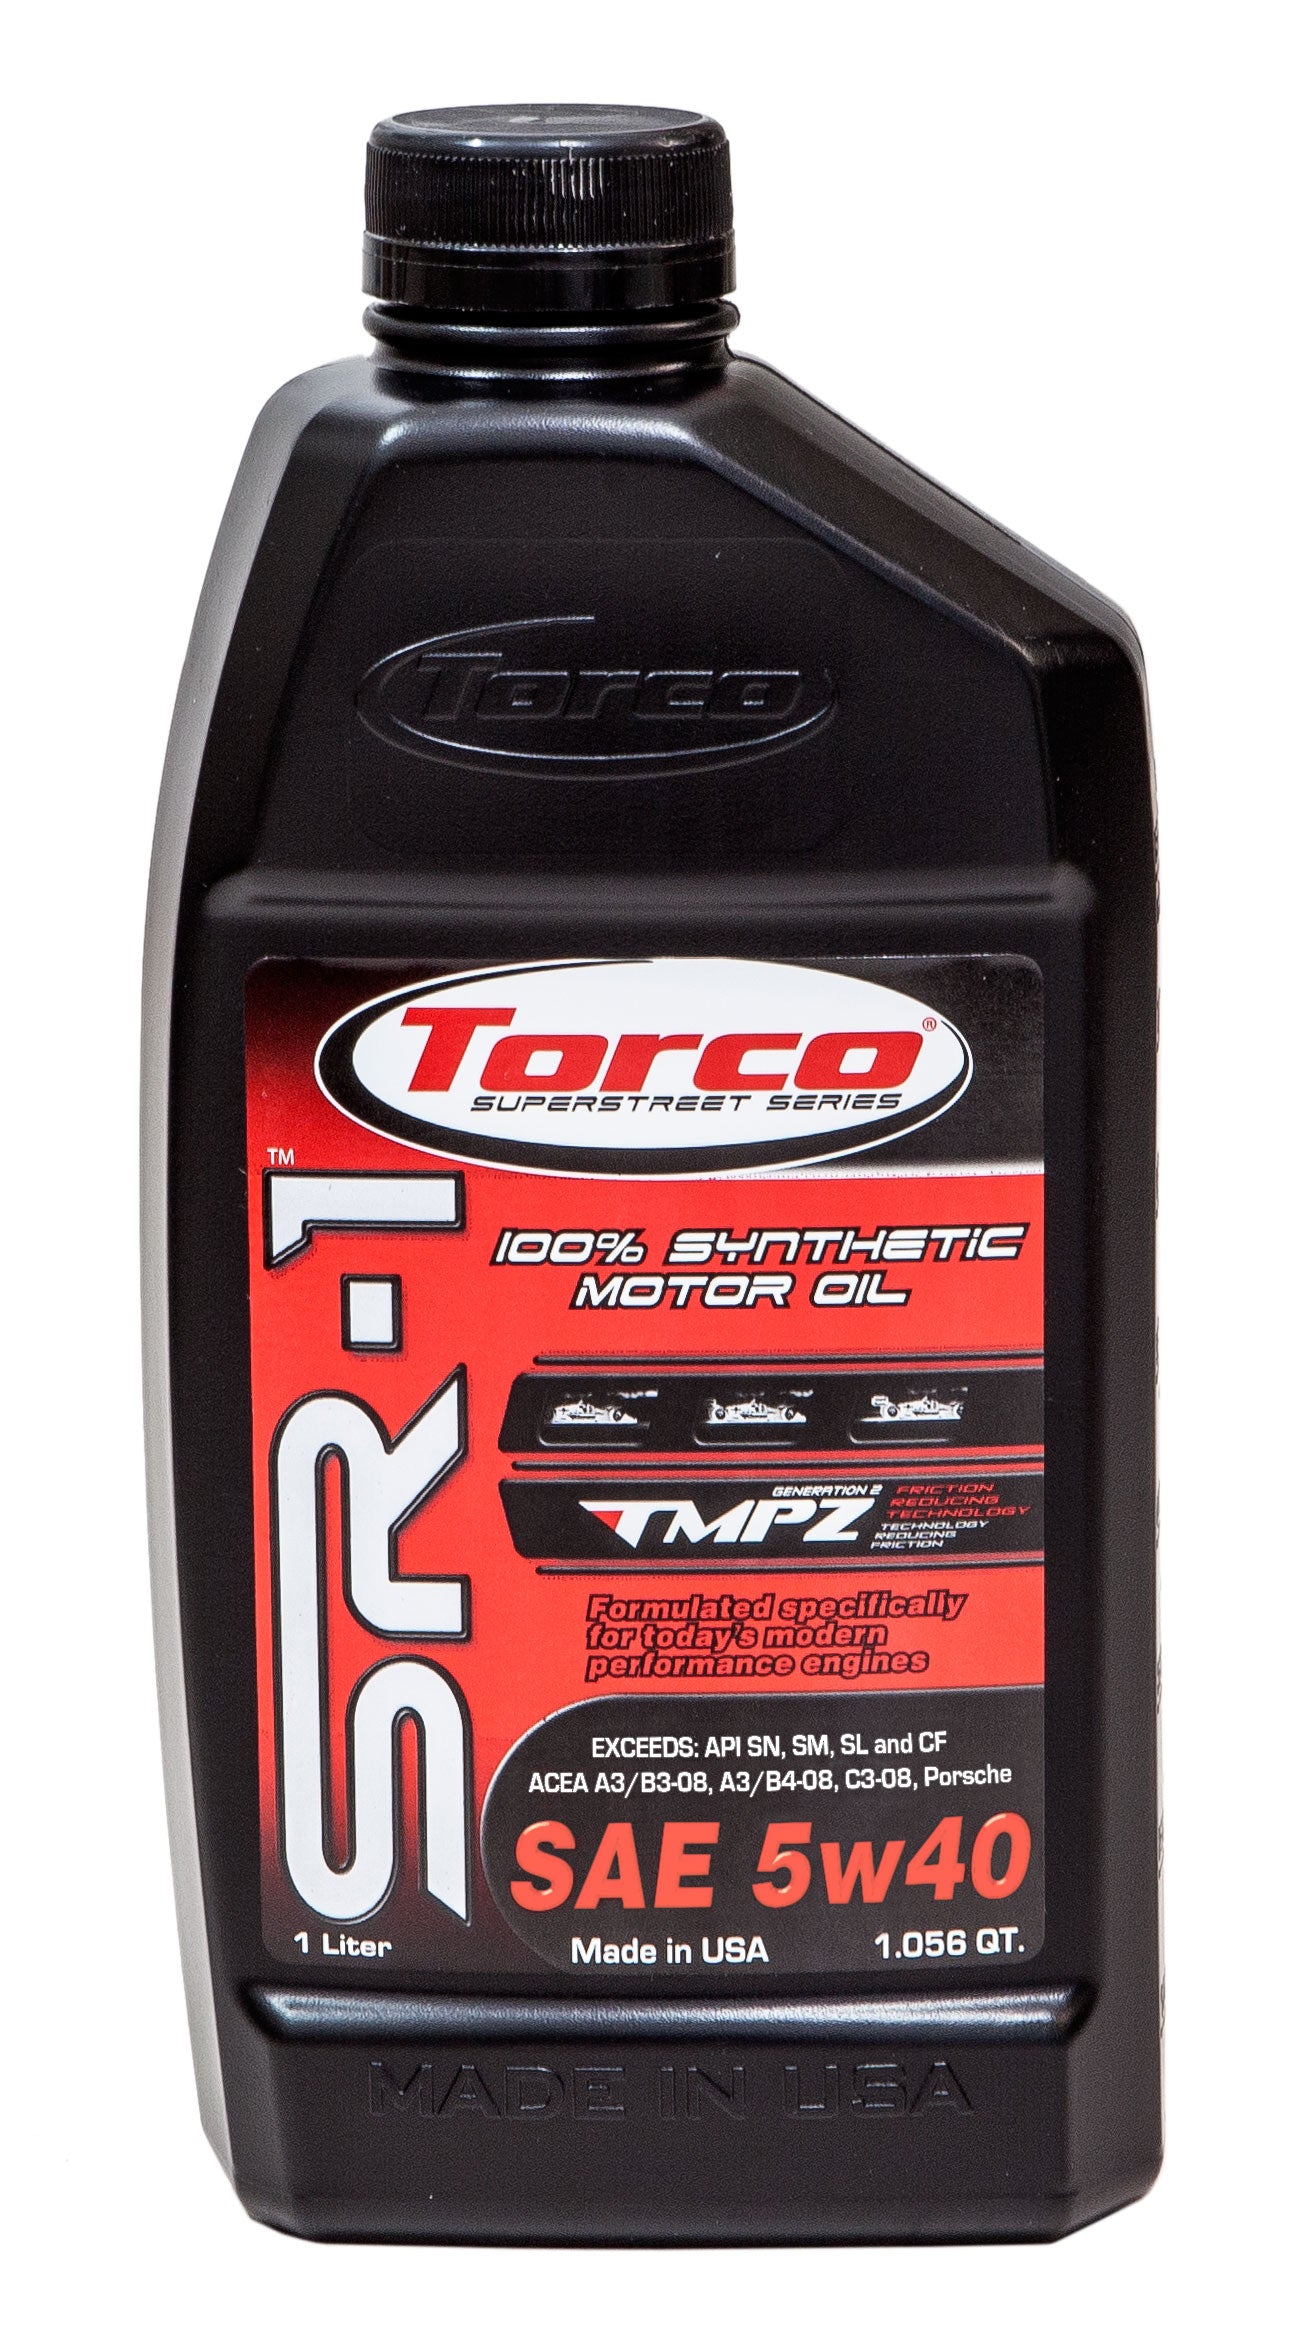 Torco Performance Oil 5w40